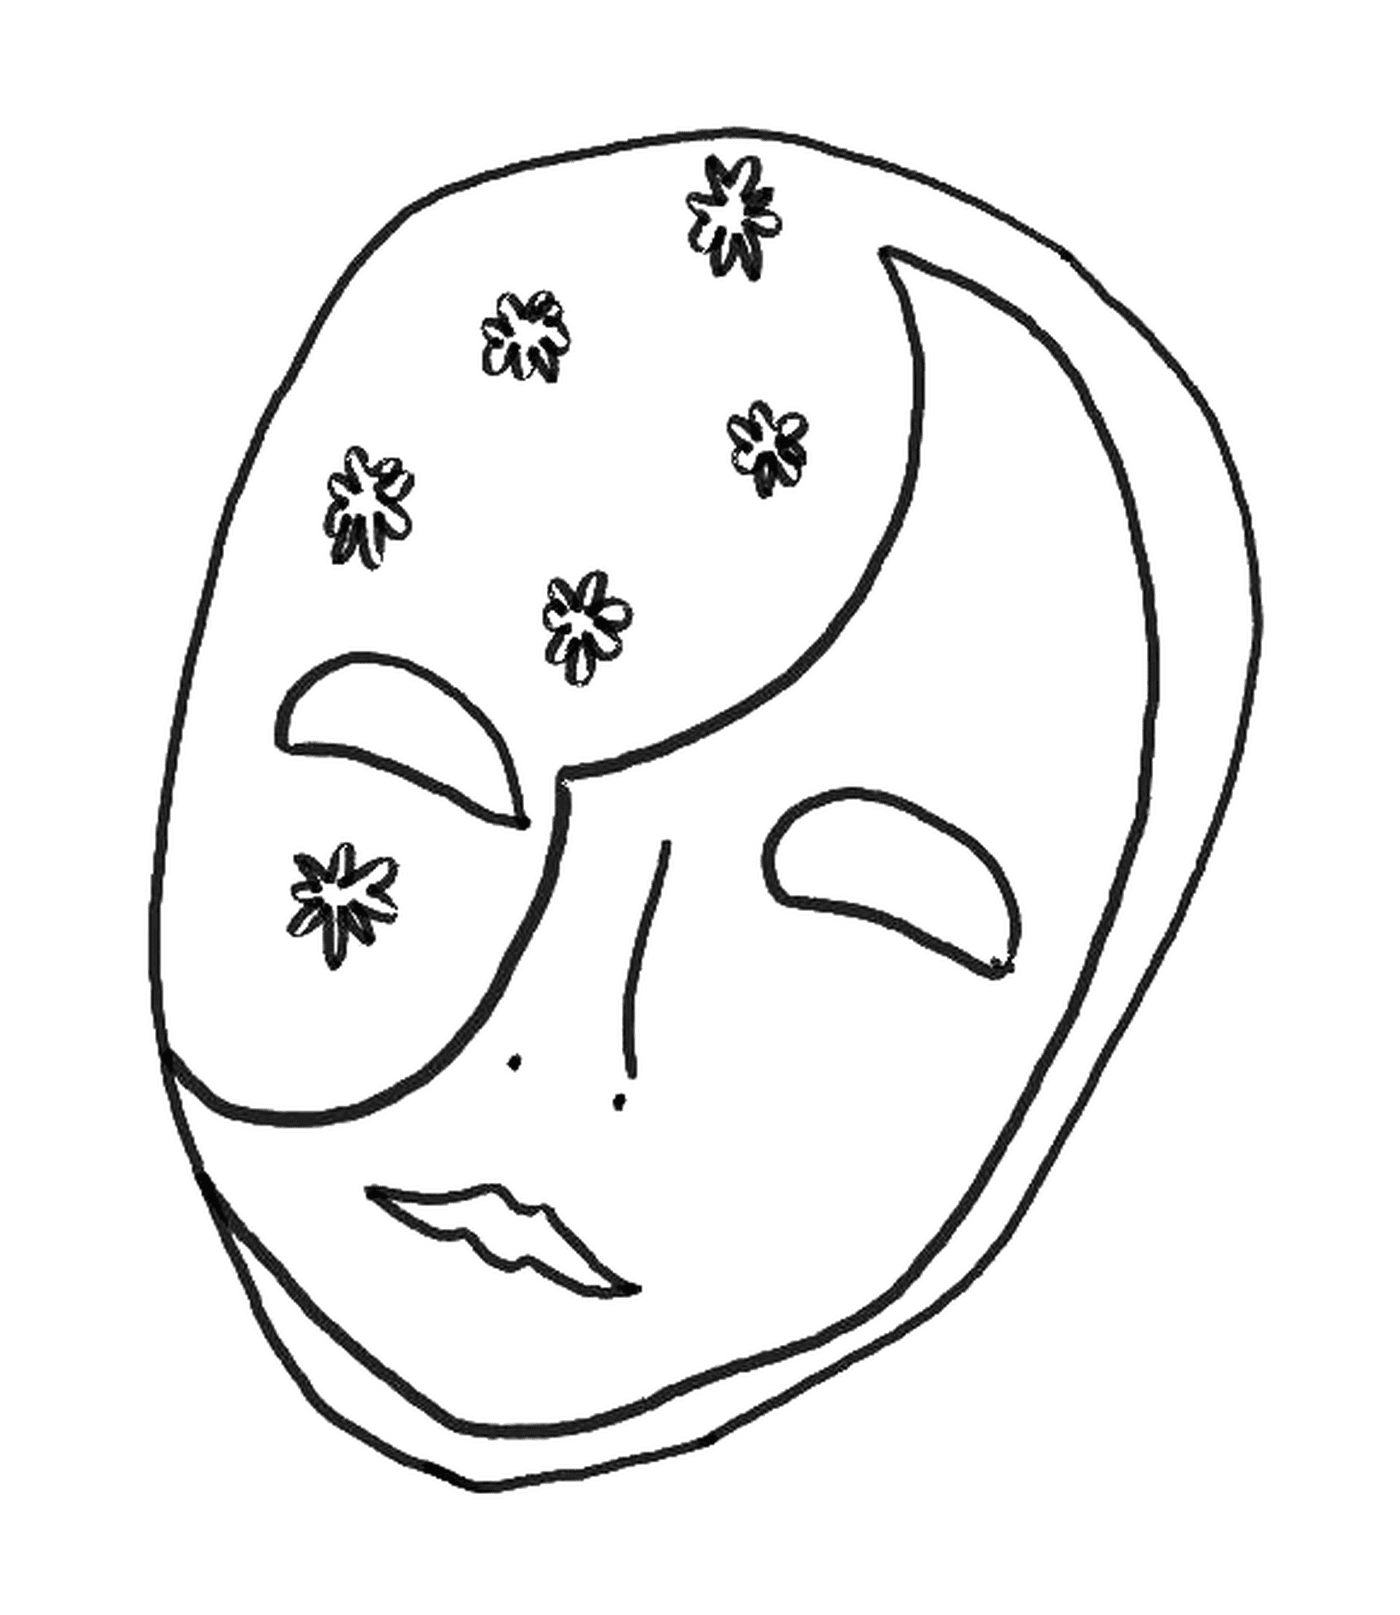  A mask for Mardi Gras with flowers 